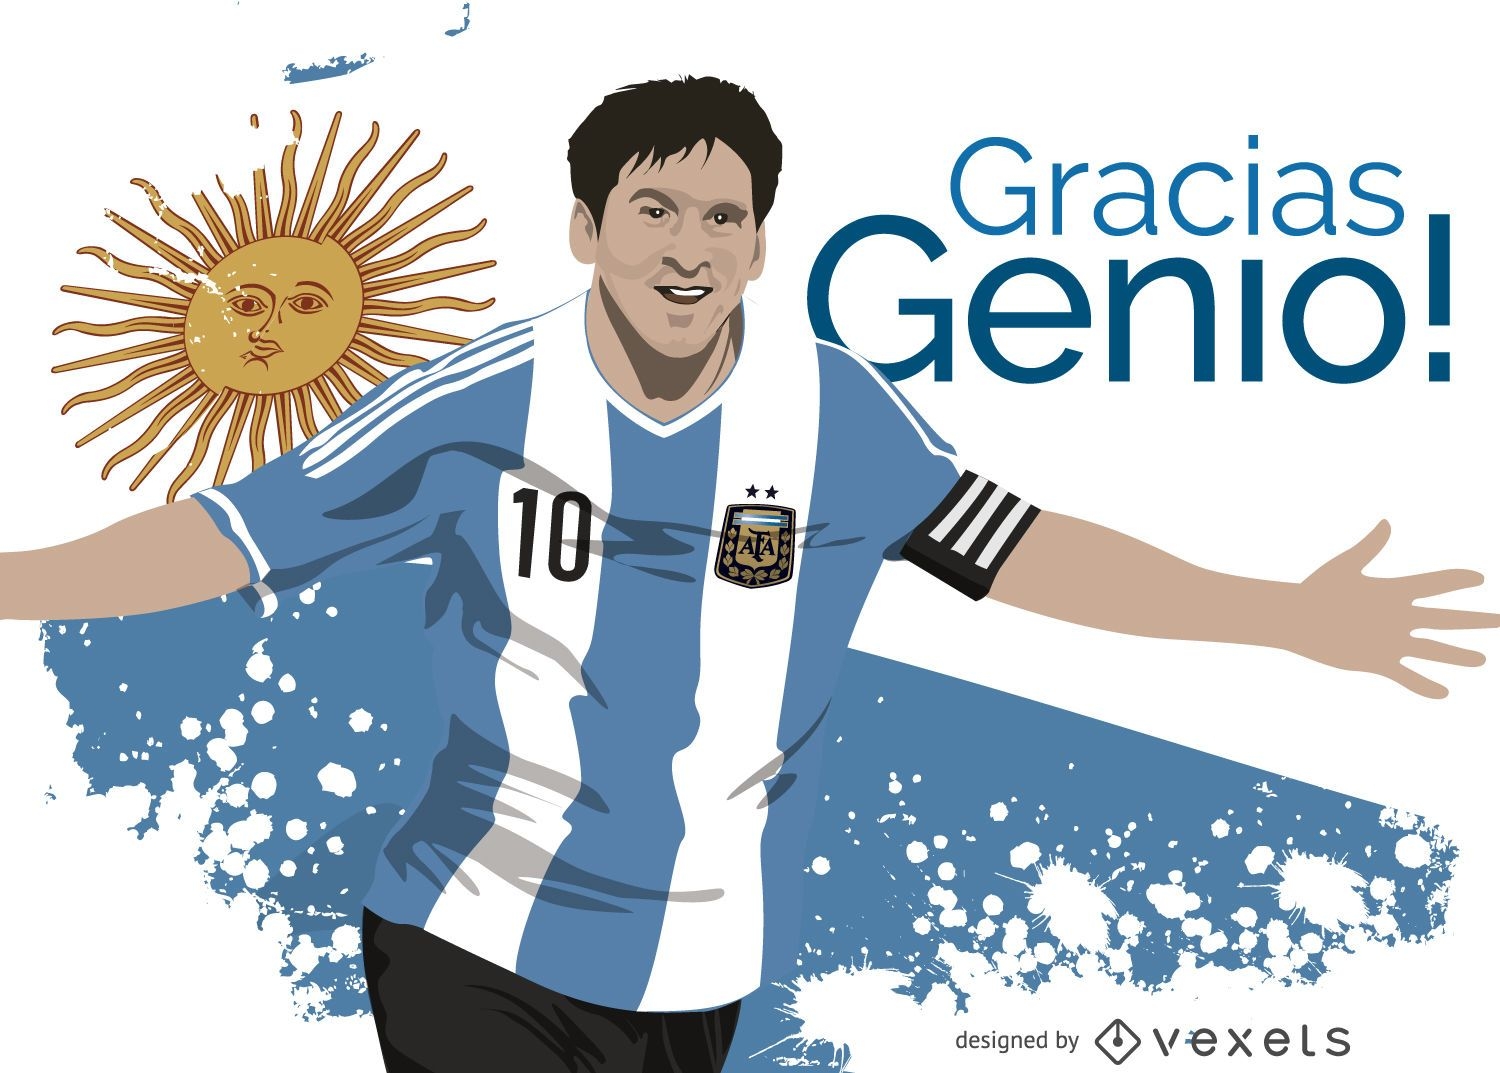 Leo Messi's illustration with message in Spanish